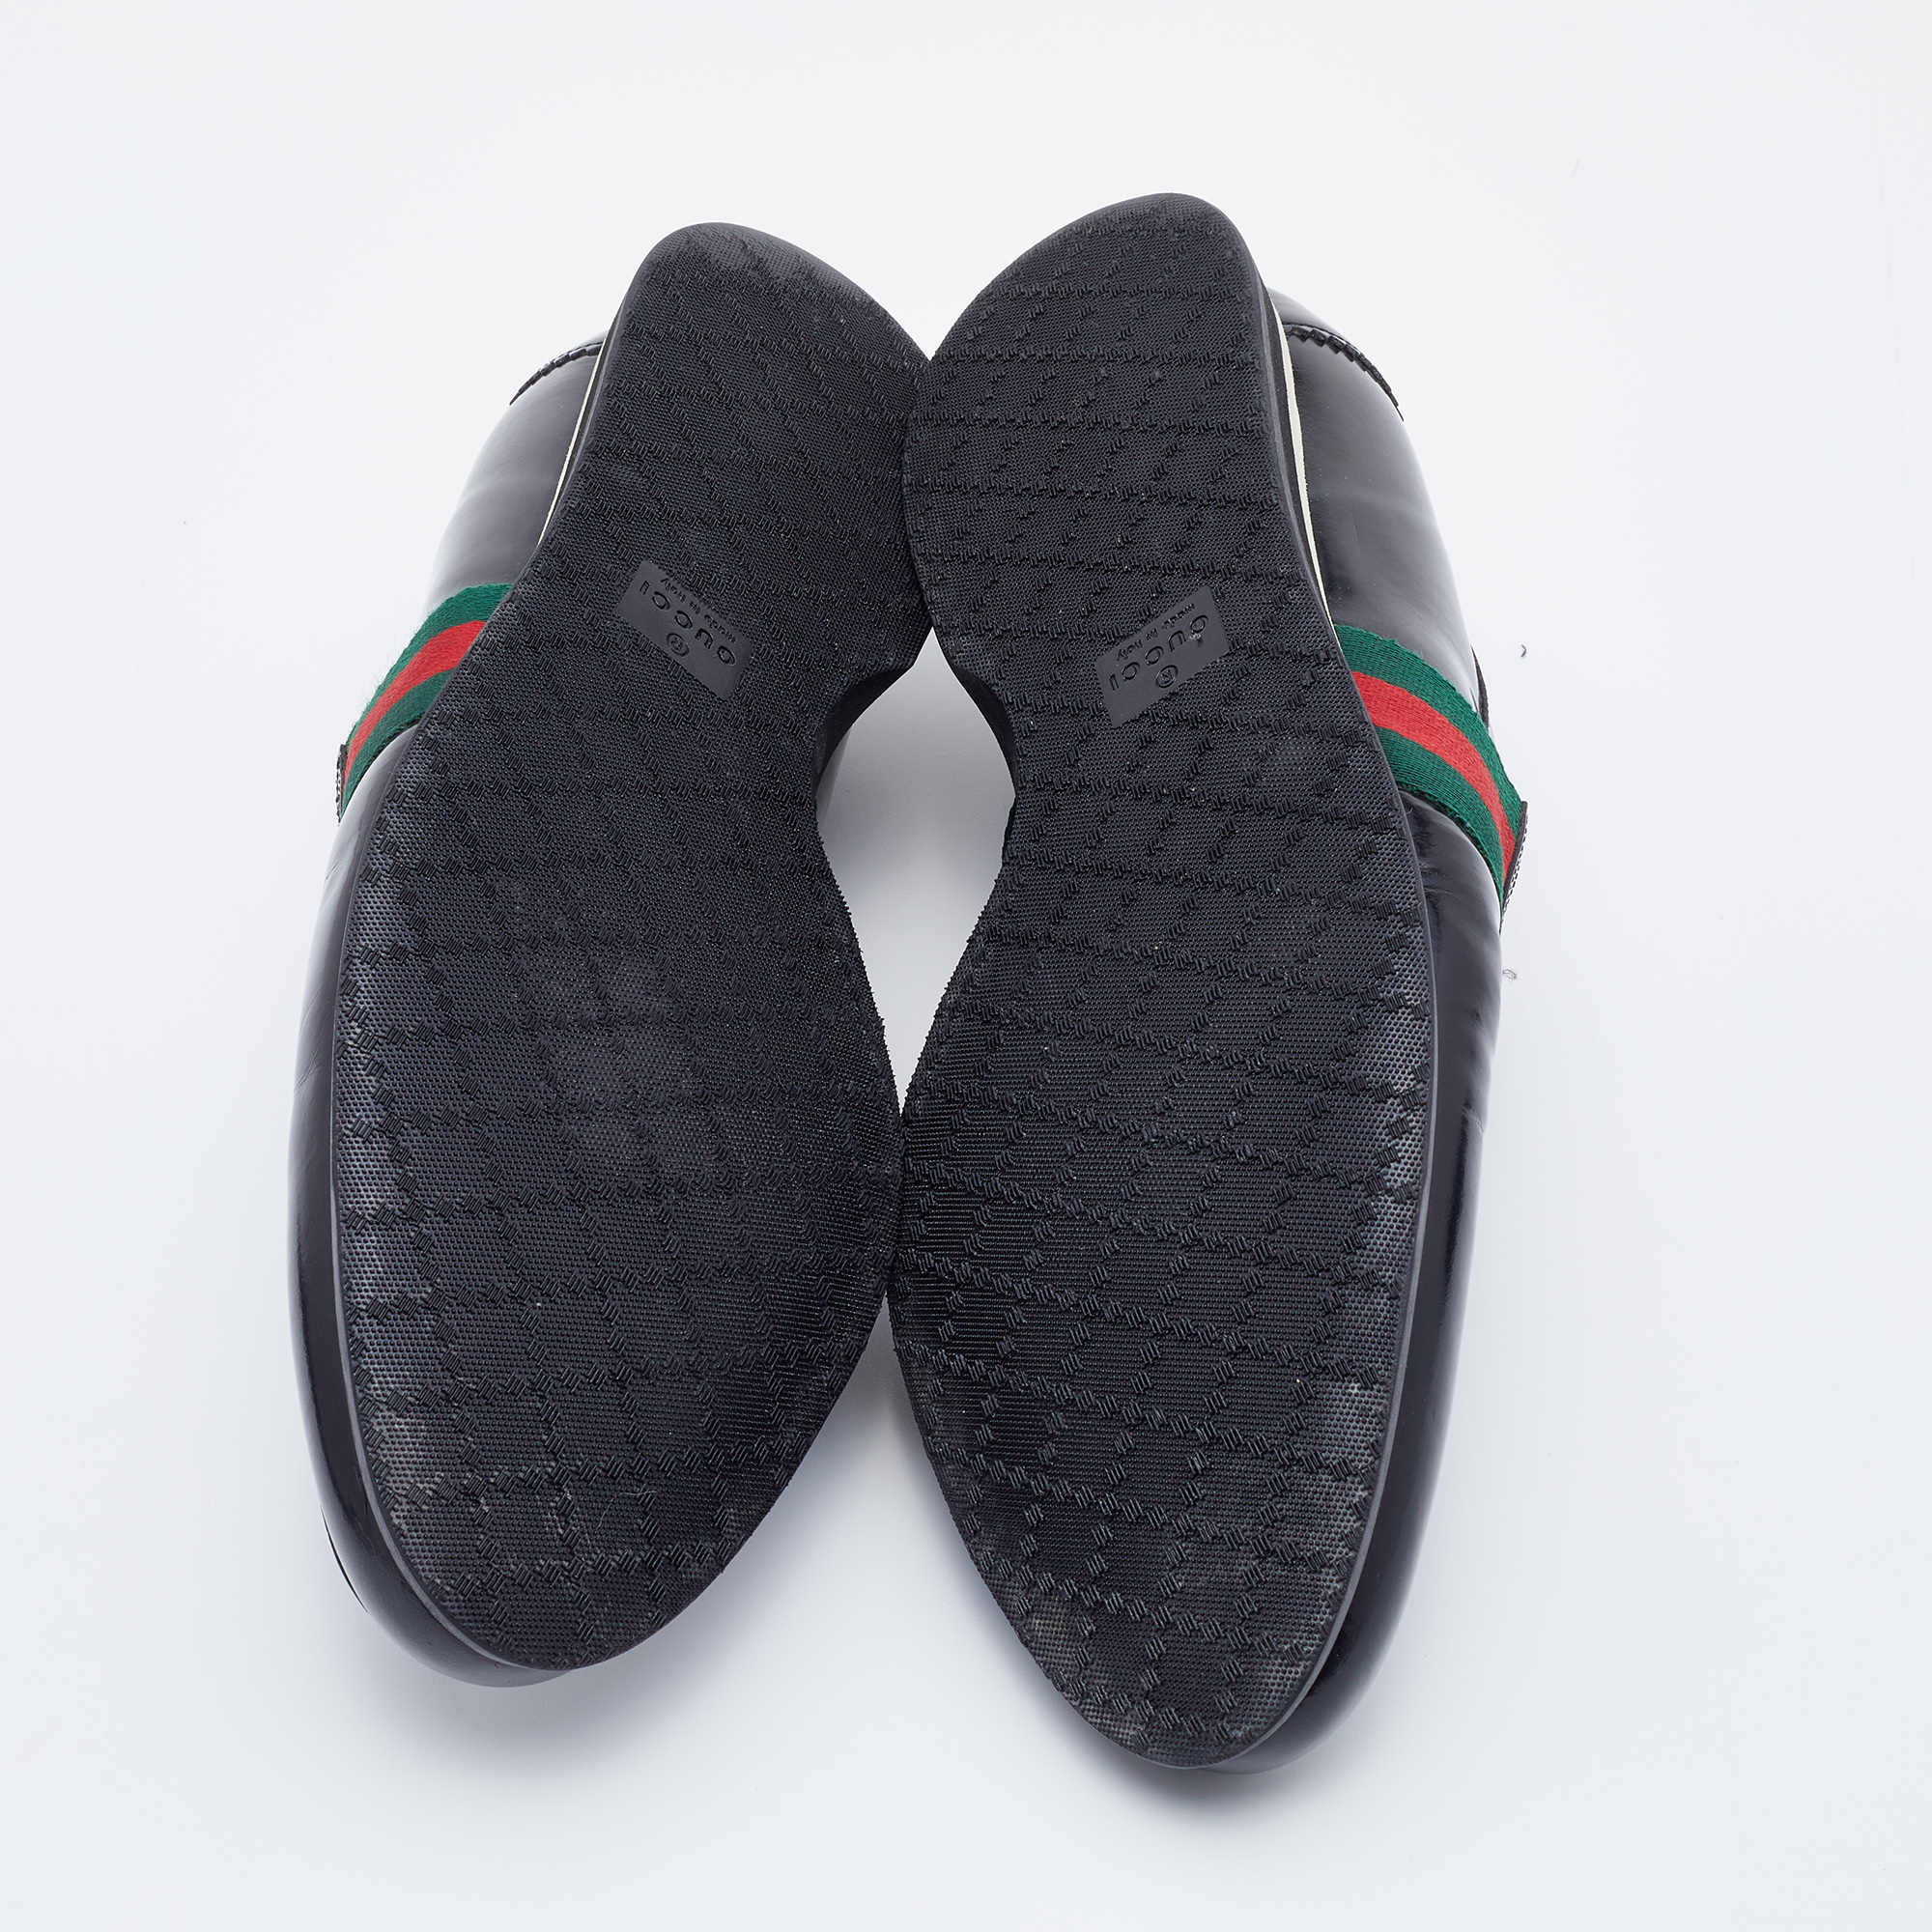 Gucci Black Leather Web Penny Slip On Loafers Size 42.5